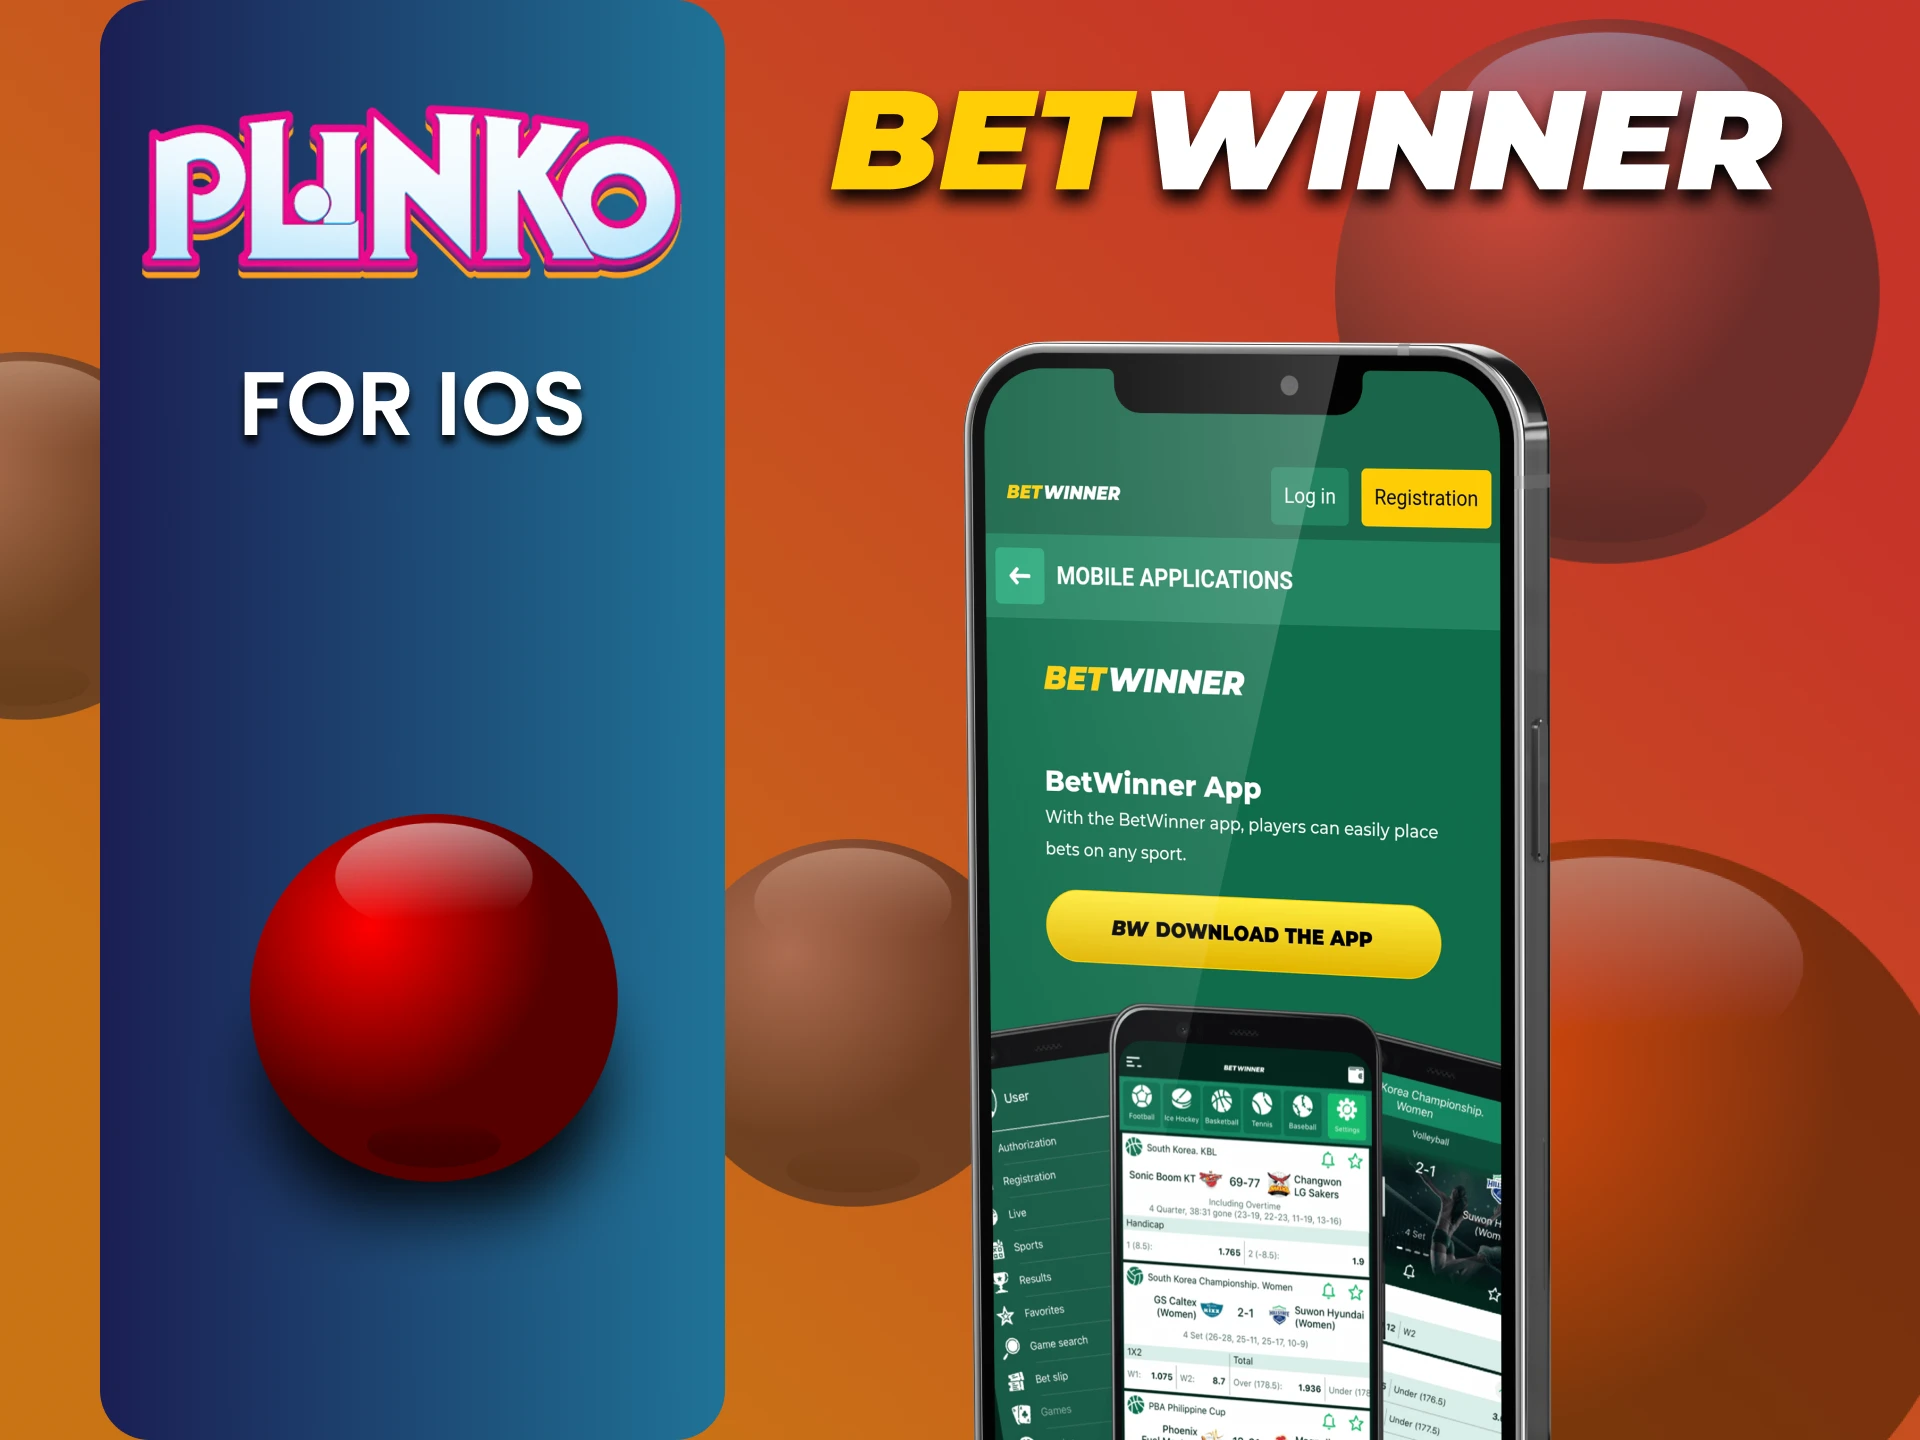 Download the Betwinner app to play Plinko on iOS.